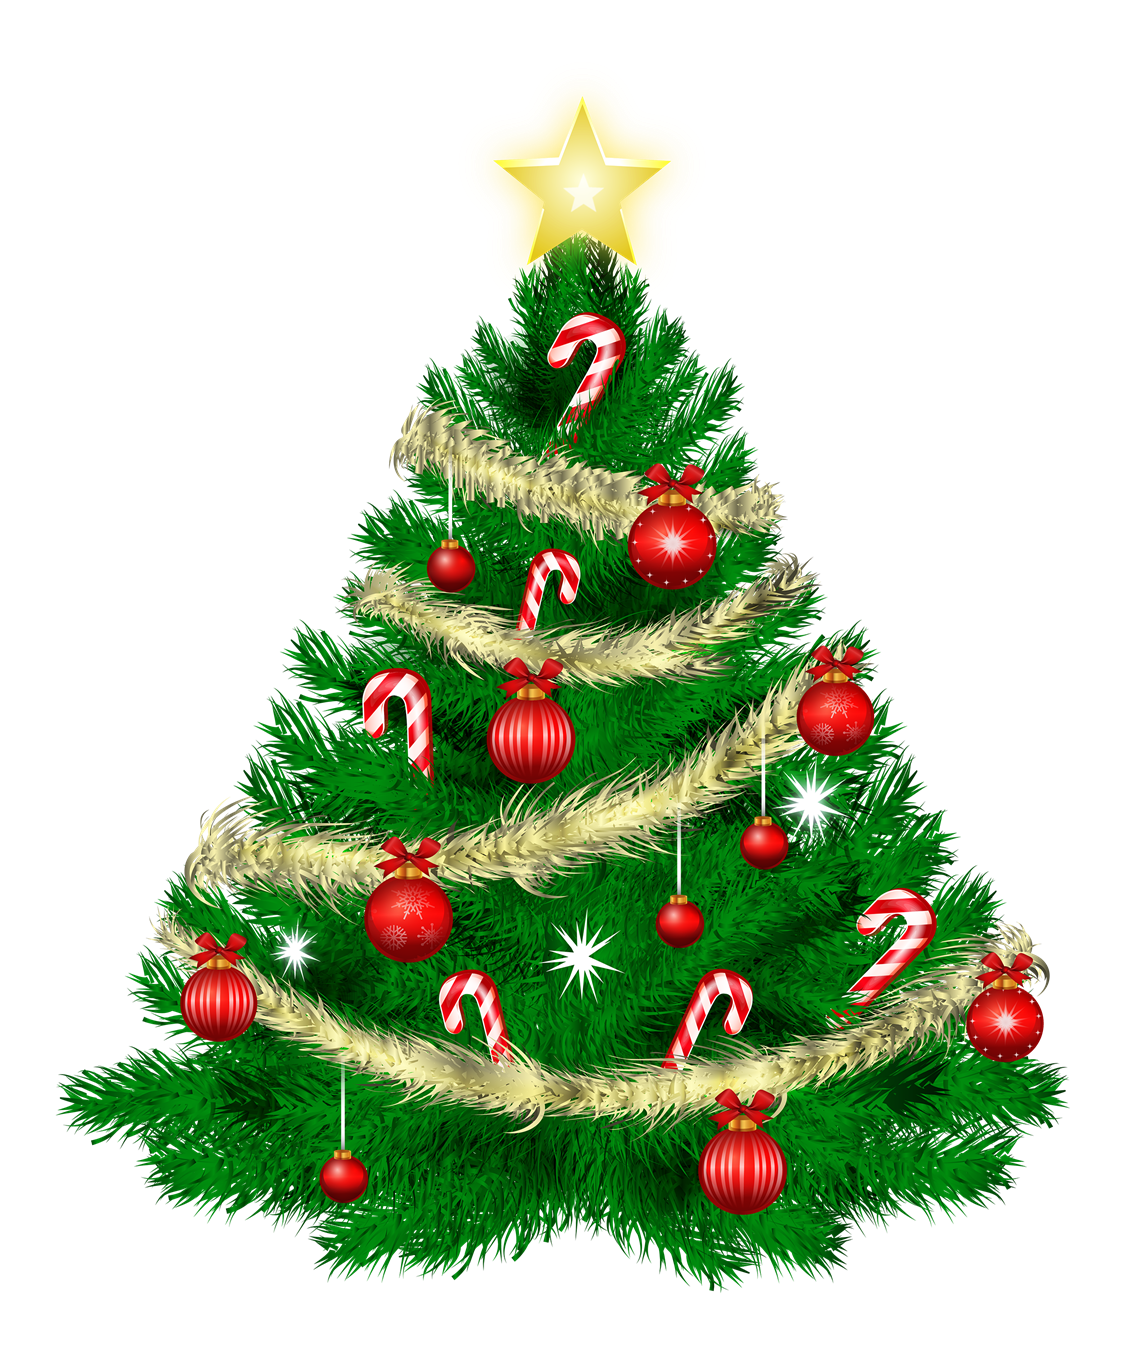 Download PNG image - Decorative Christmas Pine Tree PNG Clipart 